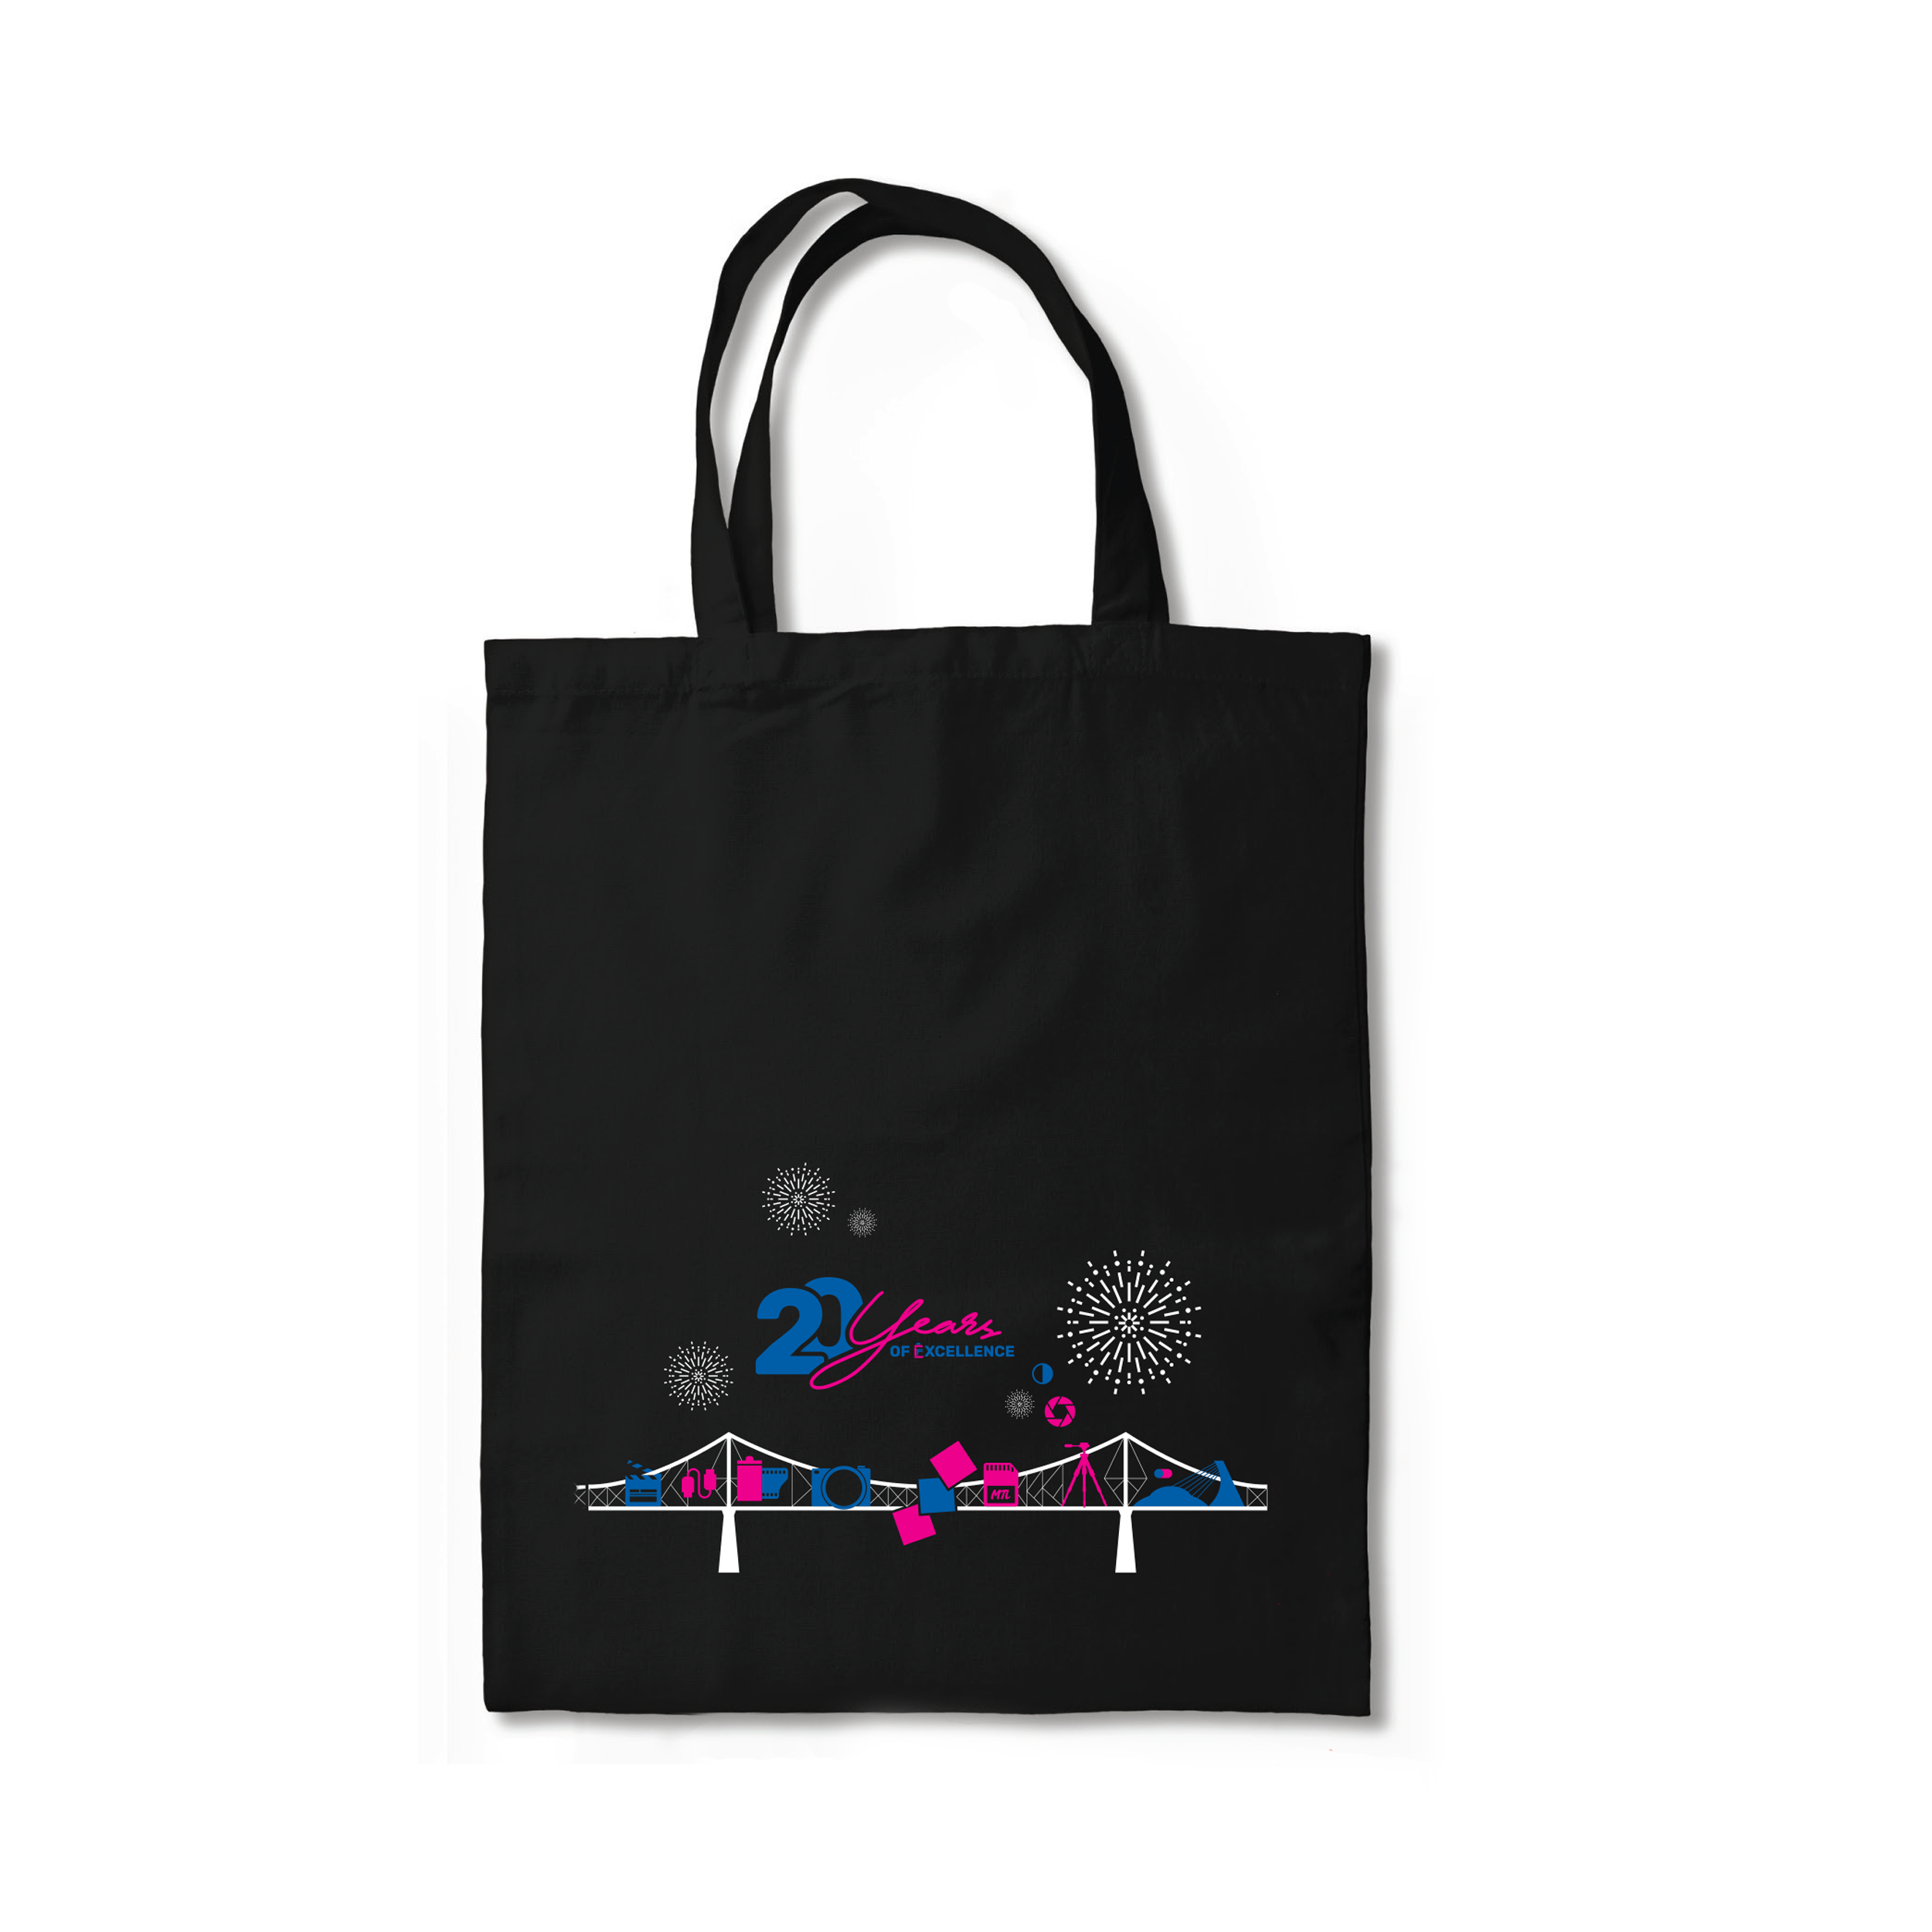 Excellent Photo 20-year anniversary tote bag - Black